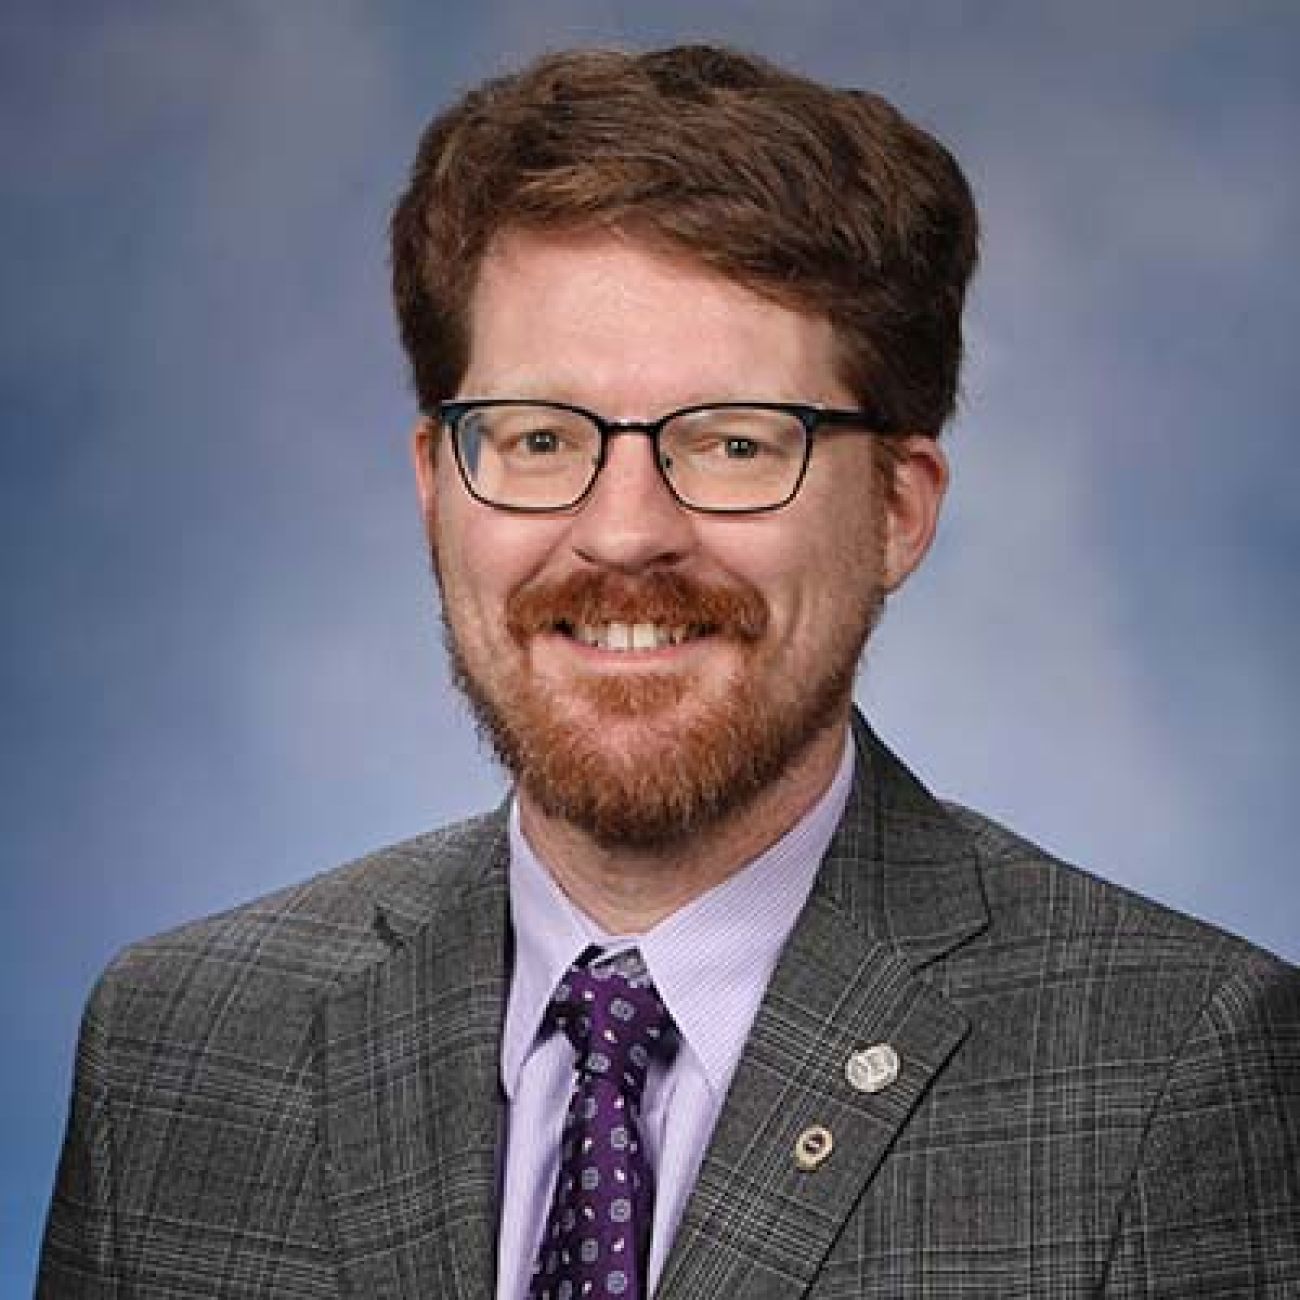 Rep. Joey Andrews, D-St. Joseph, headshot. He is wearing a grey suit with a purple shirt